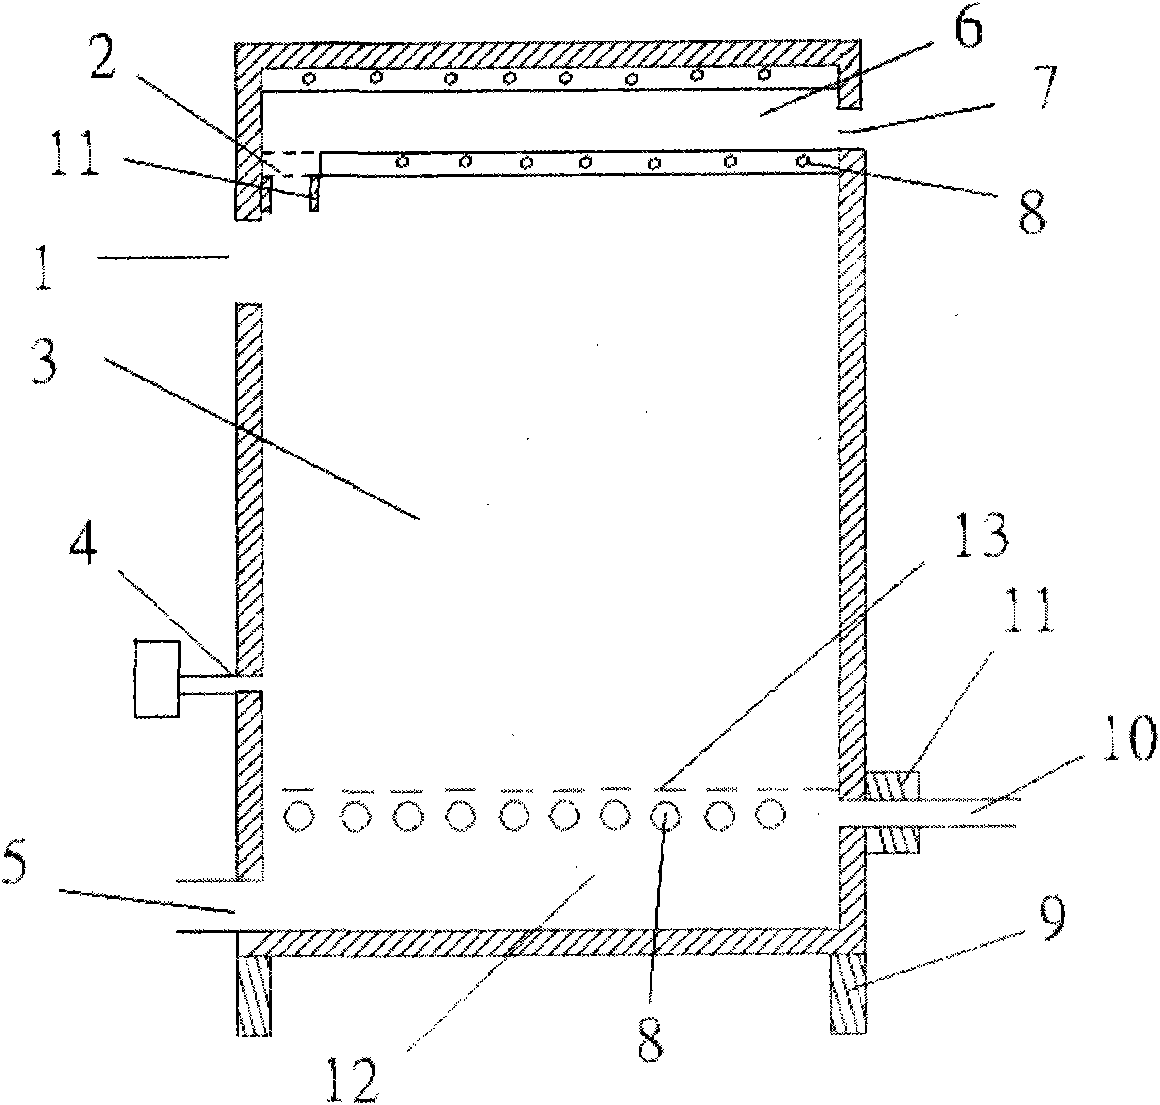 Garbage cracking catalytic gasification furnace